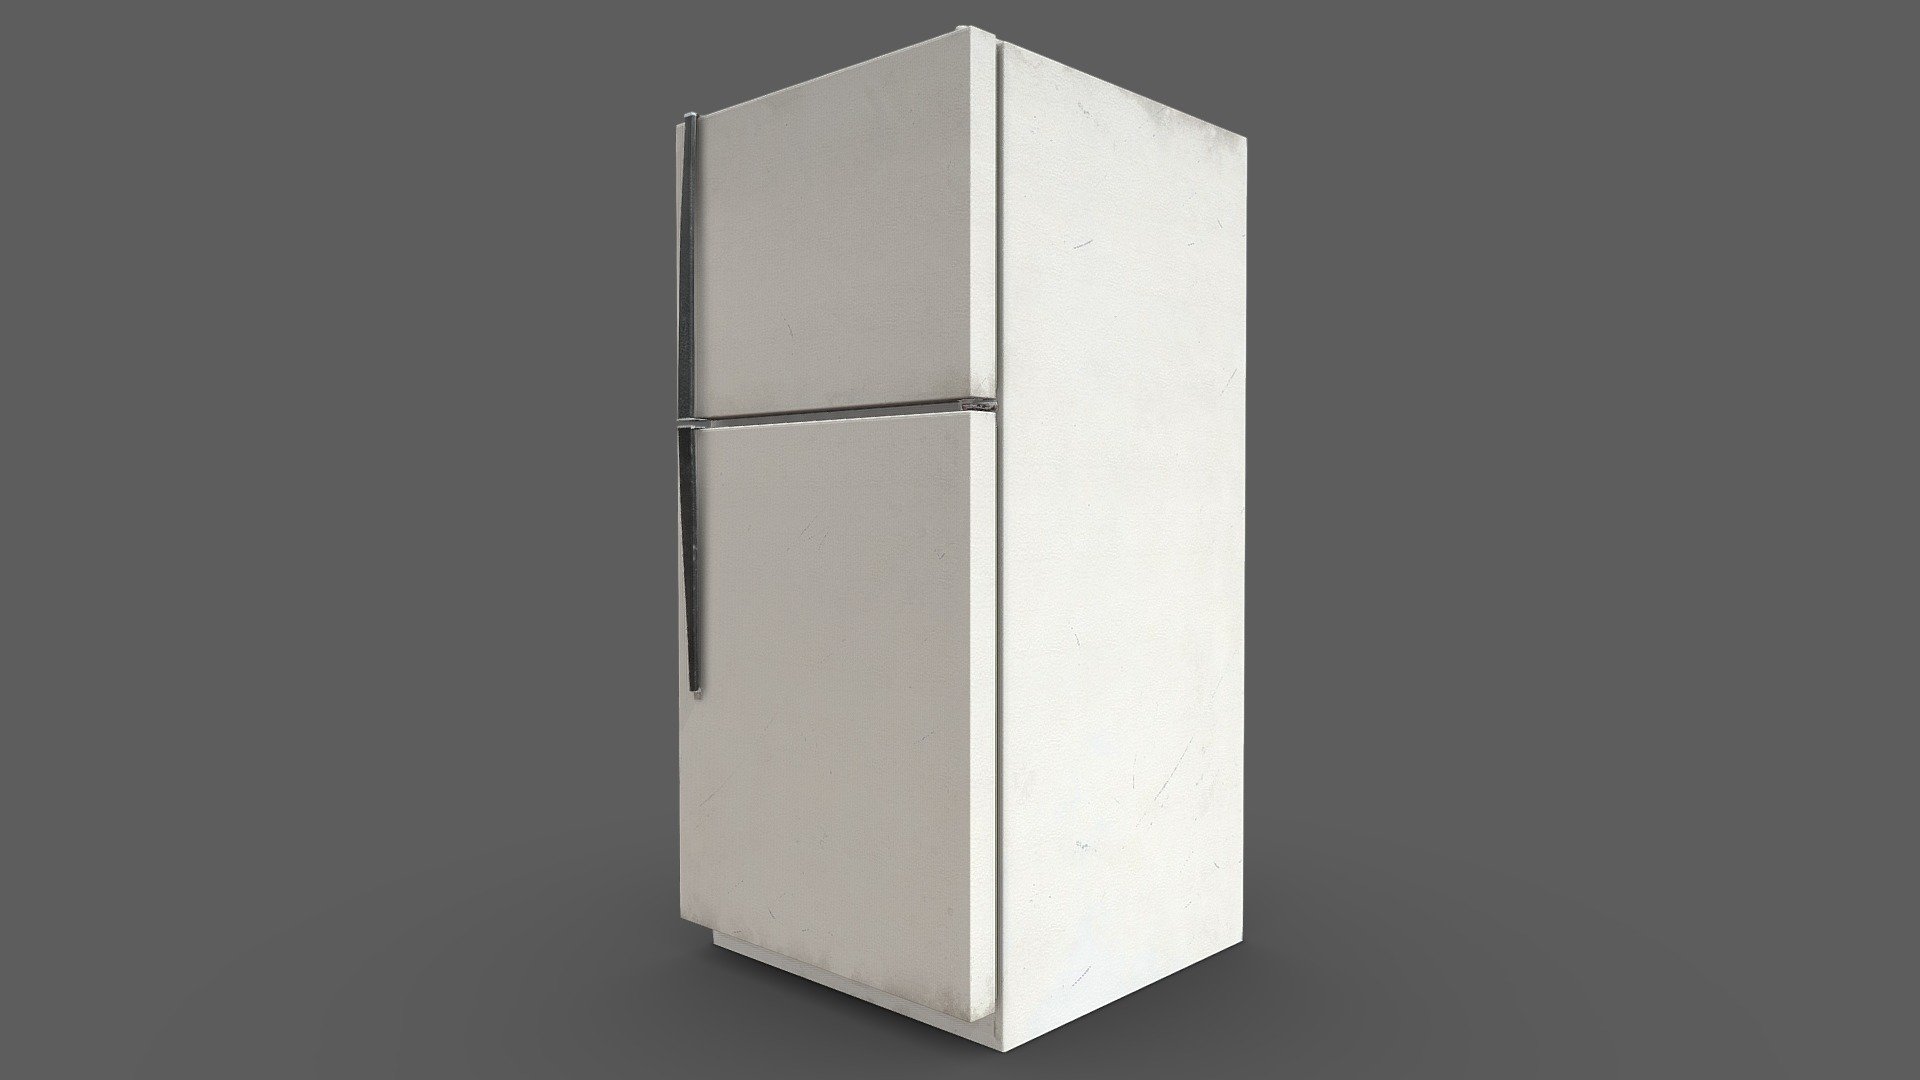 The old refrigerator that was sitting in grandma apartment upstairs. We had to remove it, but it's now available here!

Model is game-ready for Unreal and Unity.
Comes with .blend file, OBJ, STL, DAE, GLTF and FBX format.
Roughness, Metallic and AO are combined into a single RMA texture to save performances but individual maps are also included. 
Texture is 2K.

If you liked this product, please leave a positive review and follow my work on Instagram.

Whishing you the best! - Old Fridge of the 90s - Buy Royalty Free 3D model by FlynnEastwood (@antoineflynn) 3d model